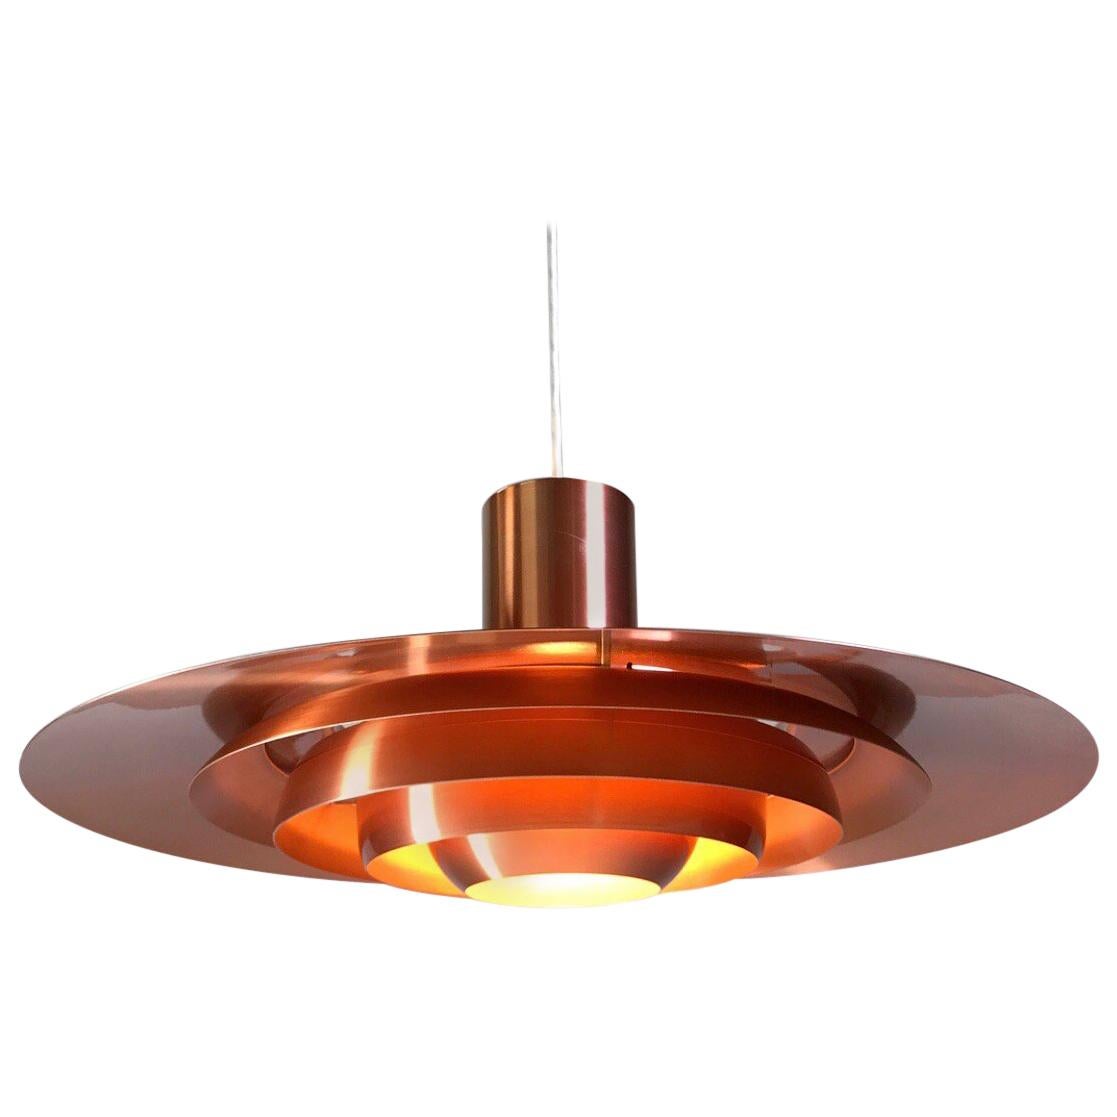 Giant Copper Ceiling Light P700 by Kastholm & Fabricius for Nordisk Solar 1964